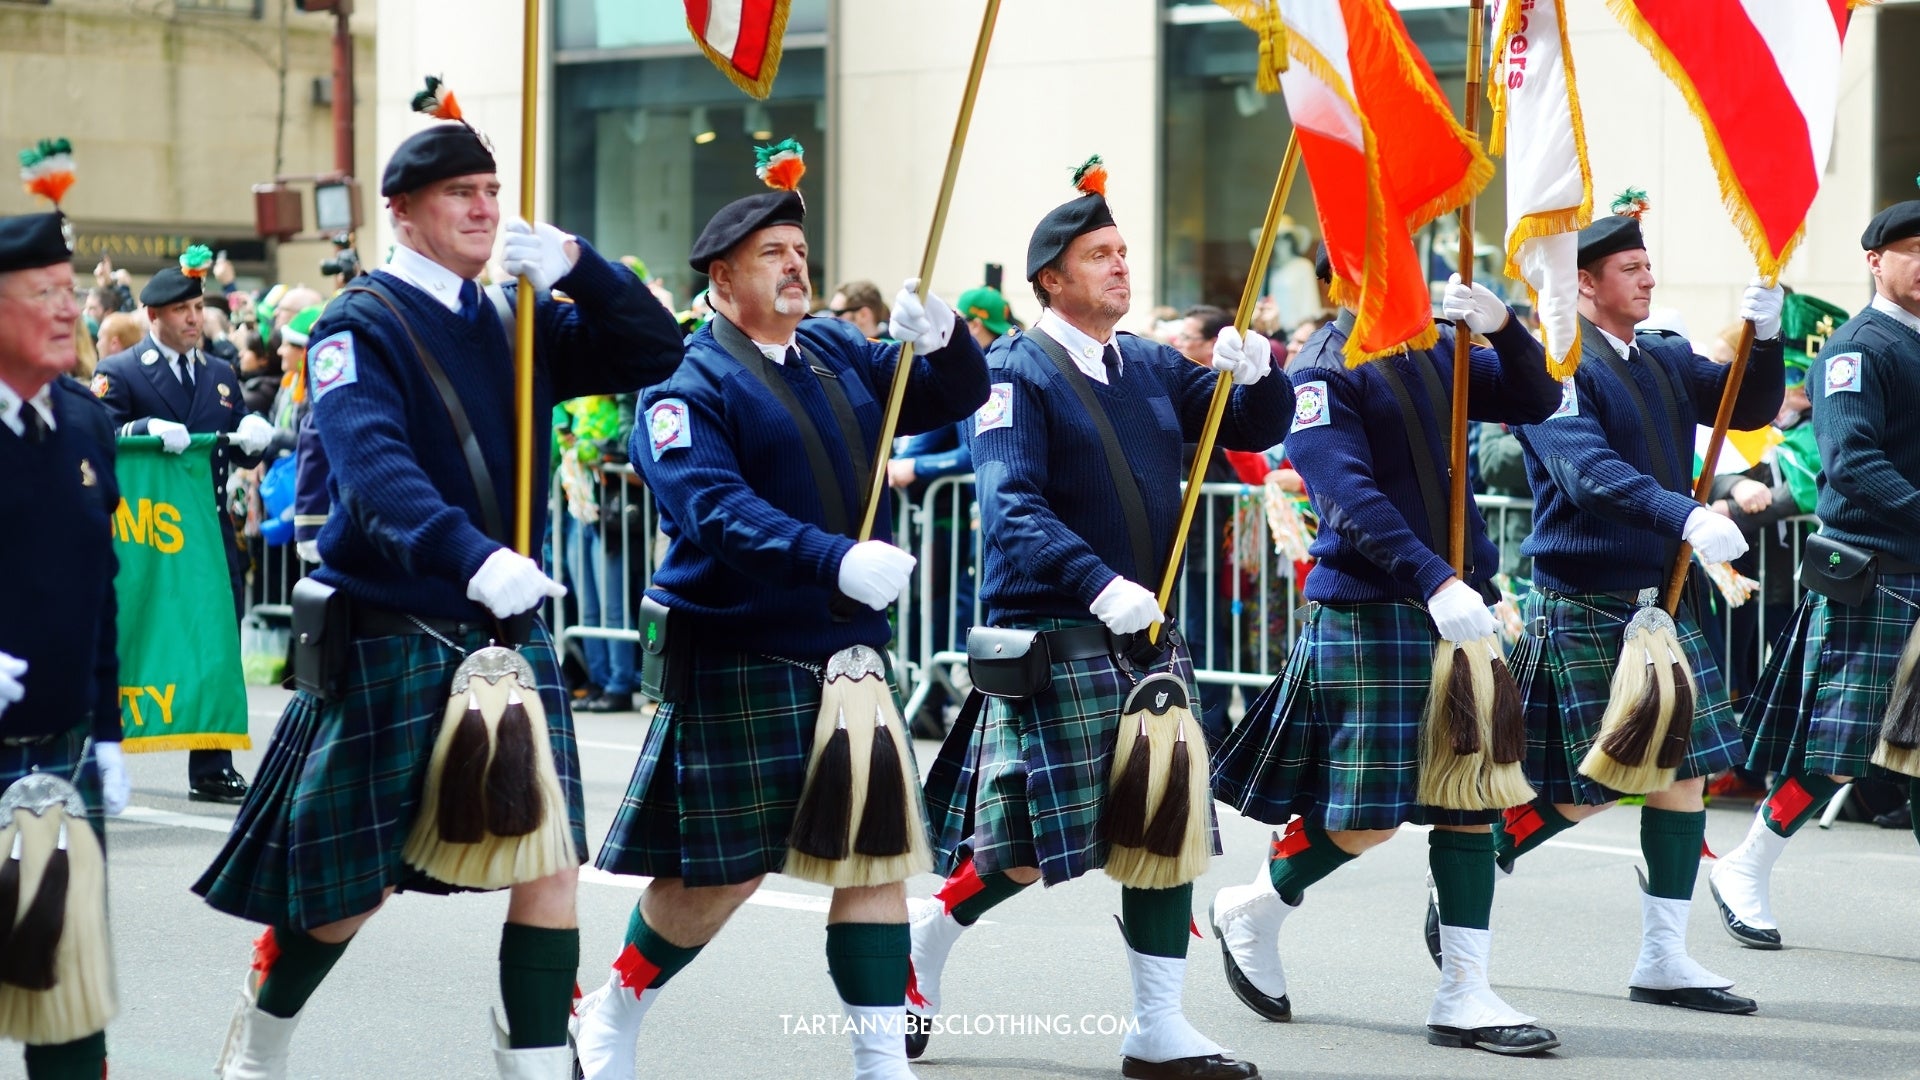 When is National Tartan Day?